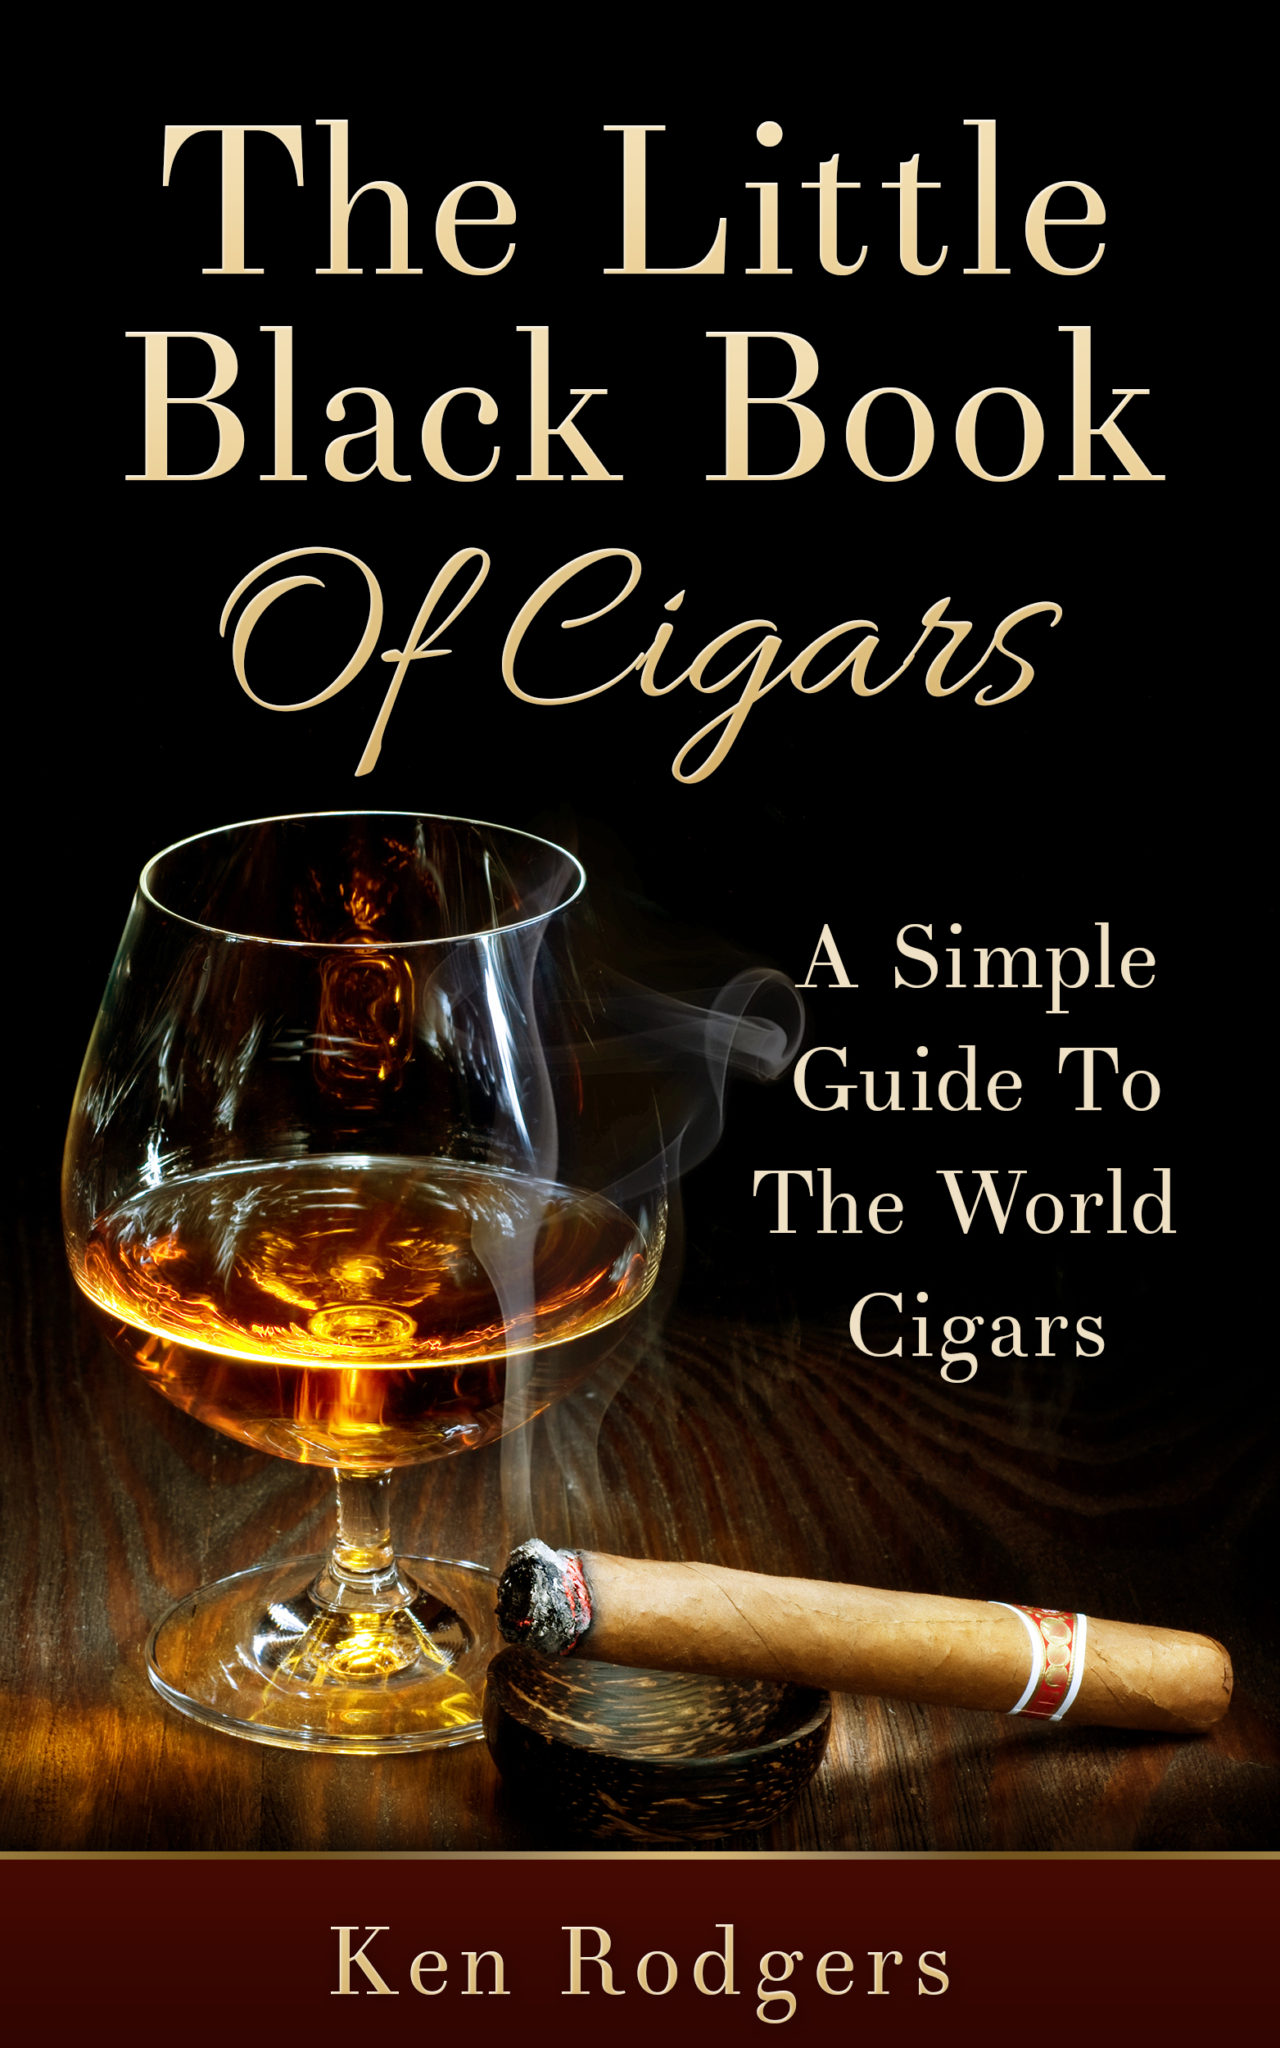 FREE: Cigars: The Little Black Book Of Cigars: A Simple Guide To The World Of Cigars by Ken Rodgers